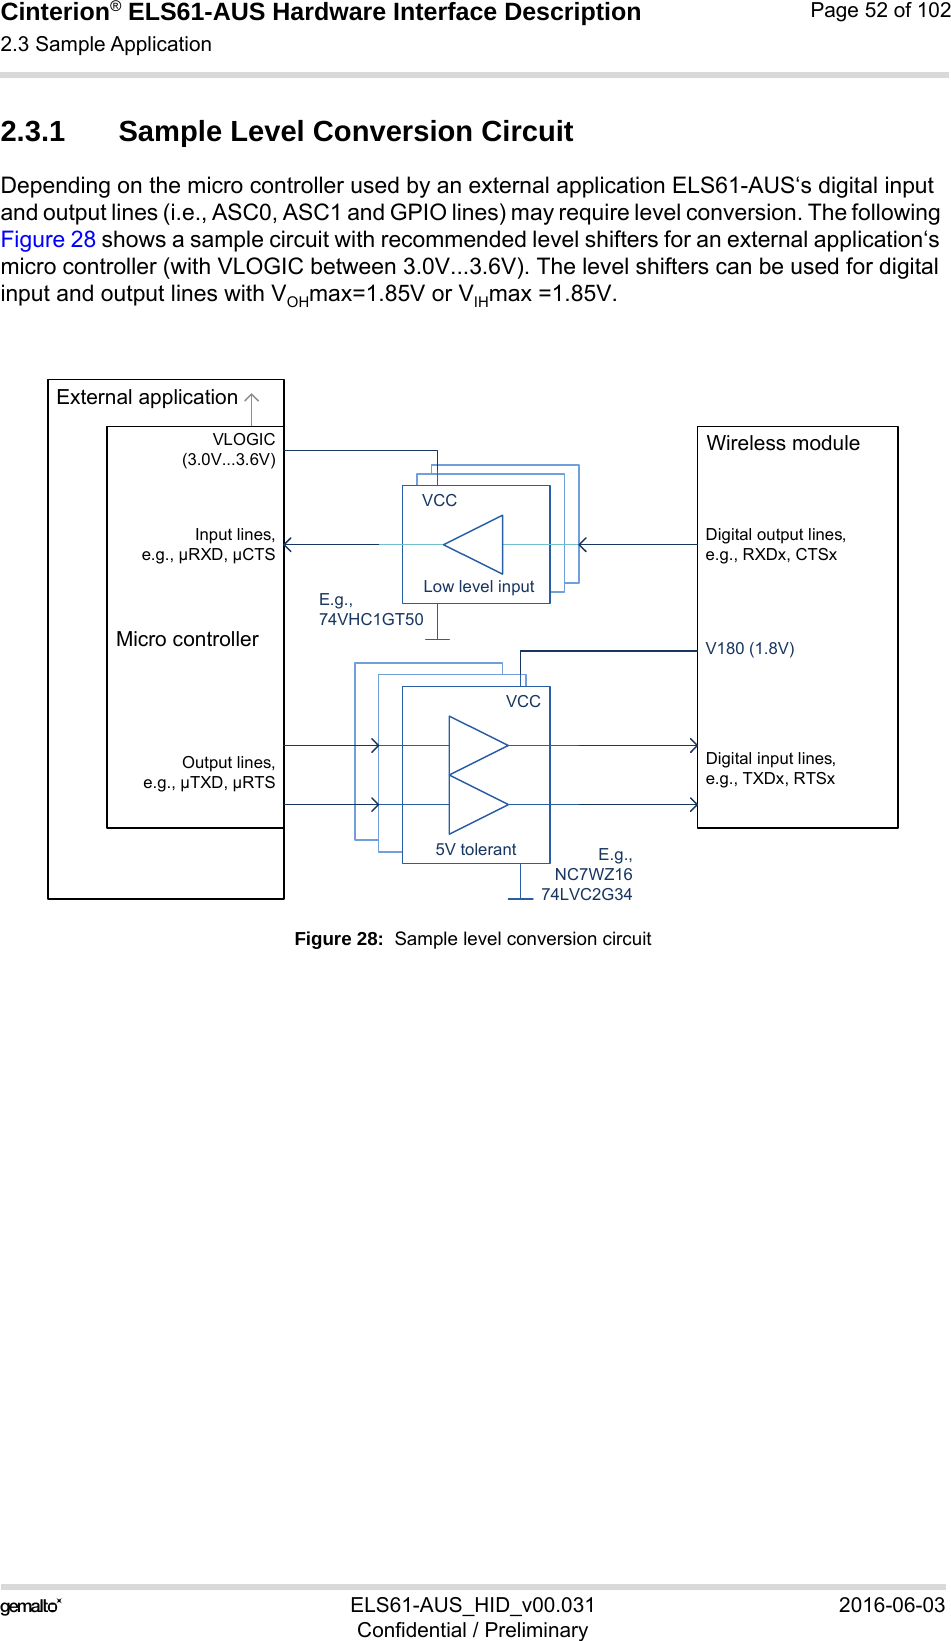 Cinterion® ELS61-AUS Hardware Interface Description2.3 Sample Application52ELS61-AUS_HID_v00.031 2016-06-03Confidential / PreliminaryPage 52 of 1022.3.1 Sample Level Conversion CircuitDepending on the micro controller used by an external application ELS61-AUS‘s digital input and output lines (i.e., ASC0, ASC1 and GPIO lines) may require level conversion. The following Figure 28 shows a sample circuit with recommended level shifters for an external application‘s micro controller (with VLOGIC between 3.0V...3.6V). The level shifters can be used for digital input and output lines with VOHmax=1.85V or VIHmax =1.85V.Figure 28:  Sample level conversion circuit5V tolerarant5V tolerarantLow level inputLow level inputLow level inputVCC5V tolerantVCCE.g.,74VHC1GT50E.g.,NC7WZ1674LVC2G34External applicationMicro controllerVLOGIC(3.0V...3.6V)Input lines,e.g., µRXD, µCTSOutput lines,e.g., µTXD, µRTSV180 (1.8V)Digital output lines,e.g., RXDx, CTSxWireless moduleDigital input lines,e.g., TXDx, RTSx